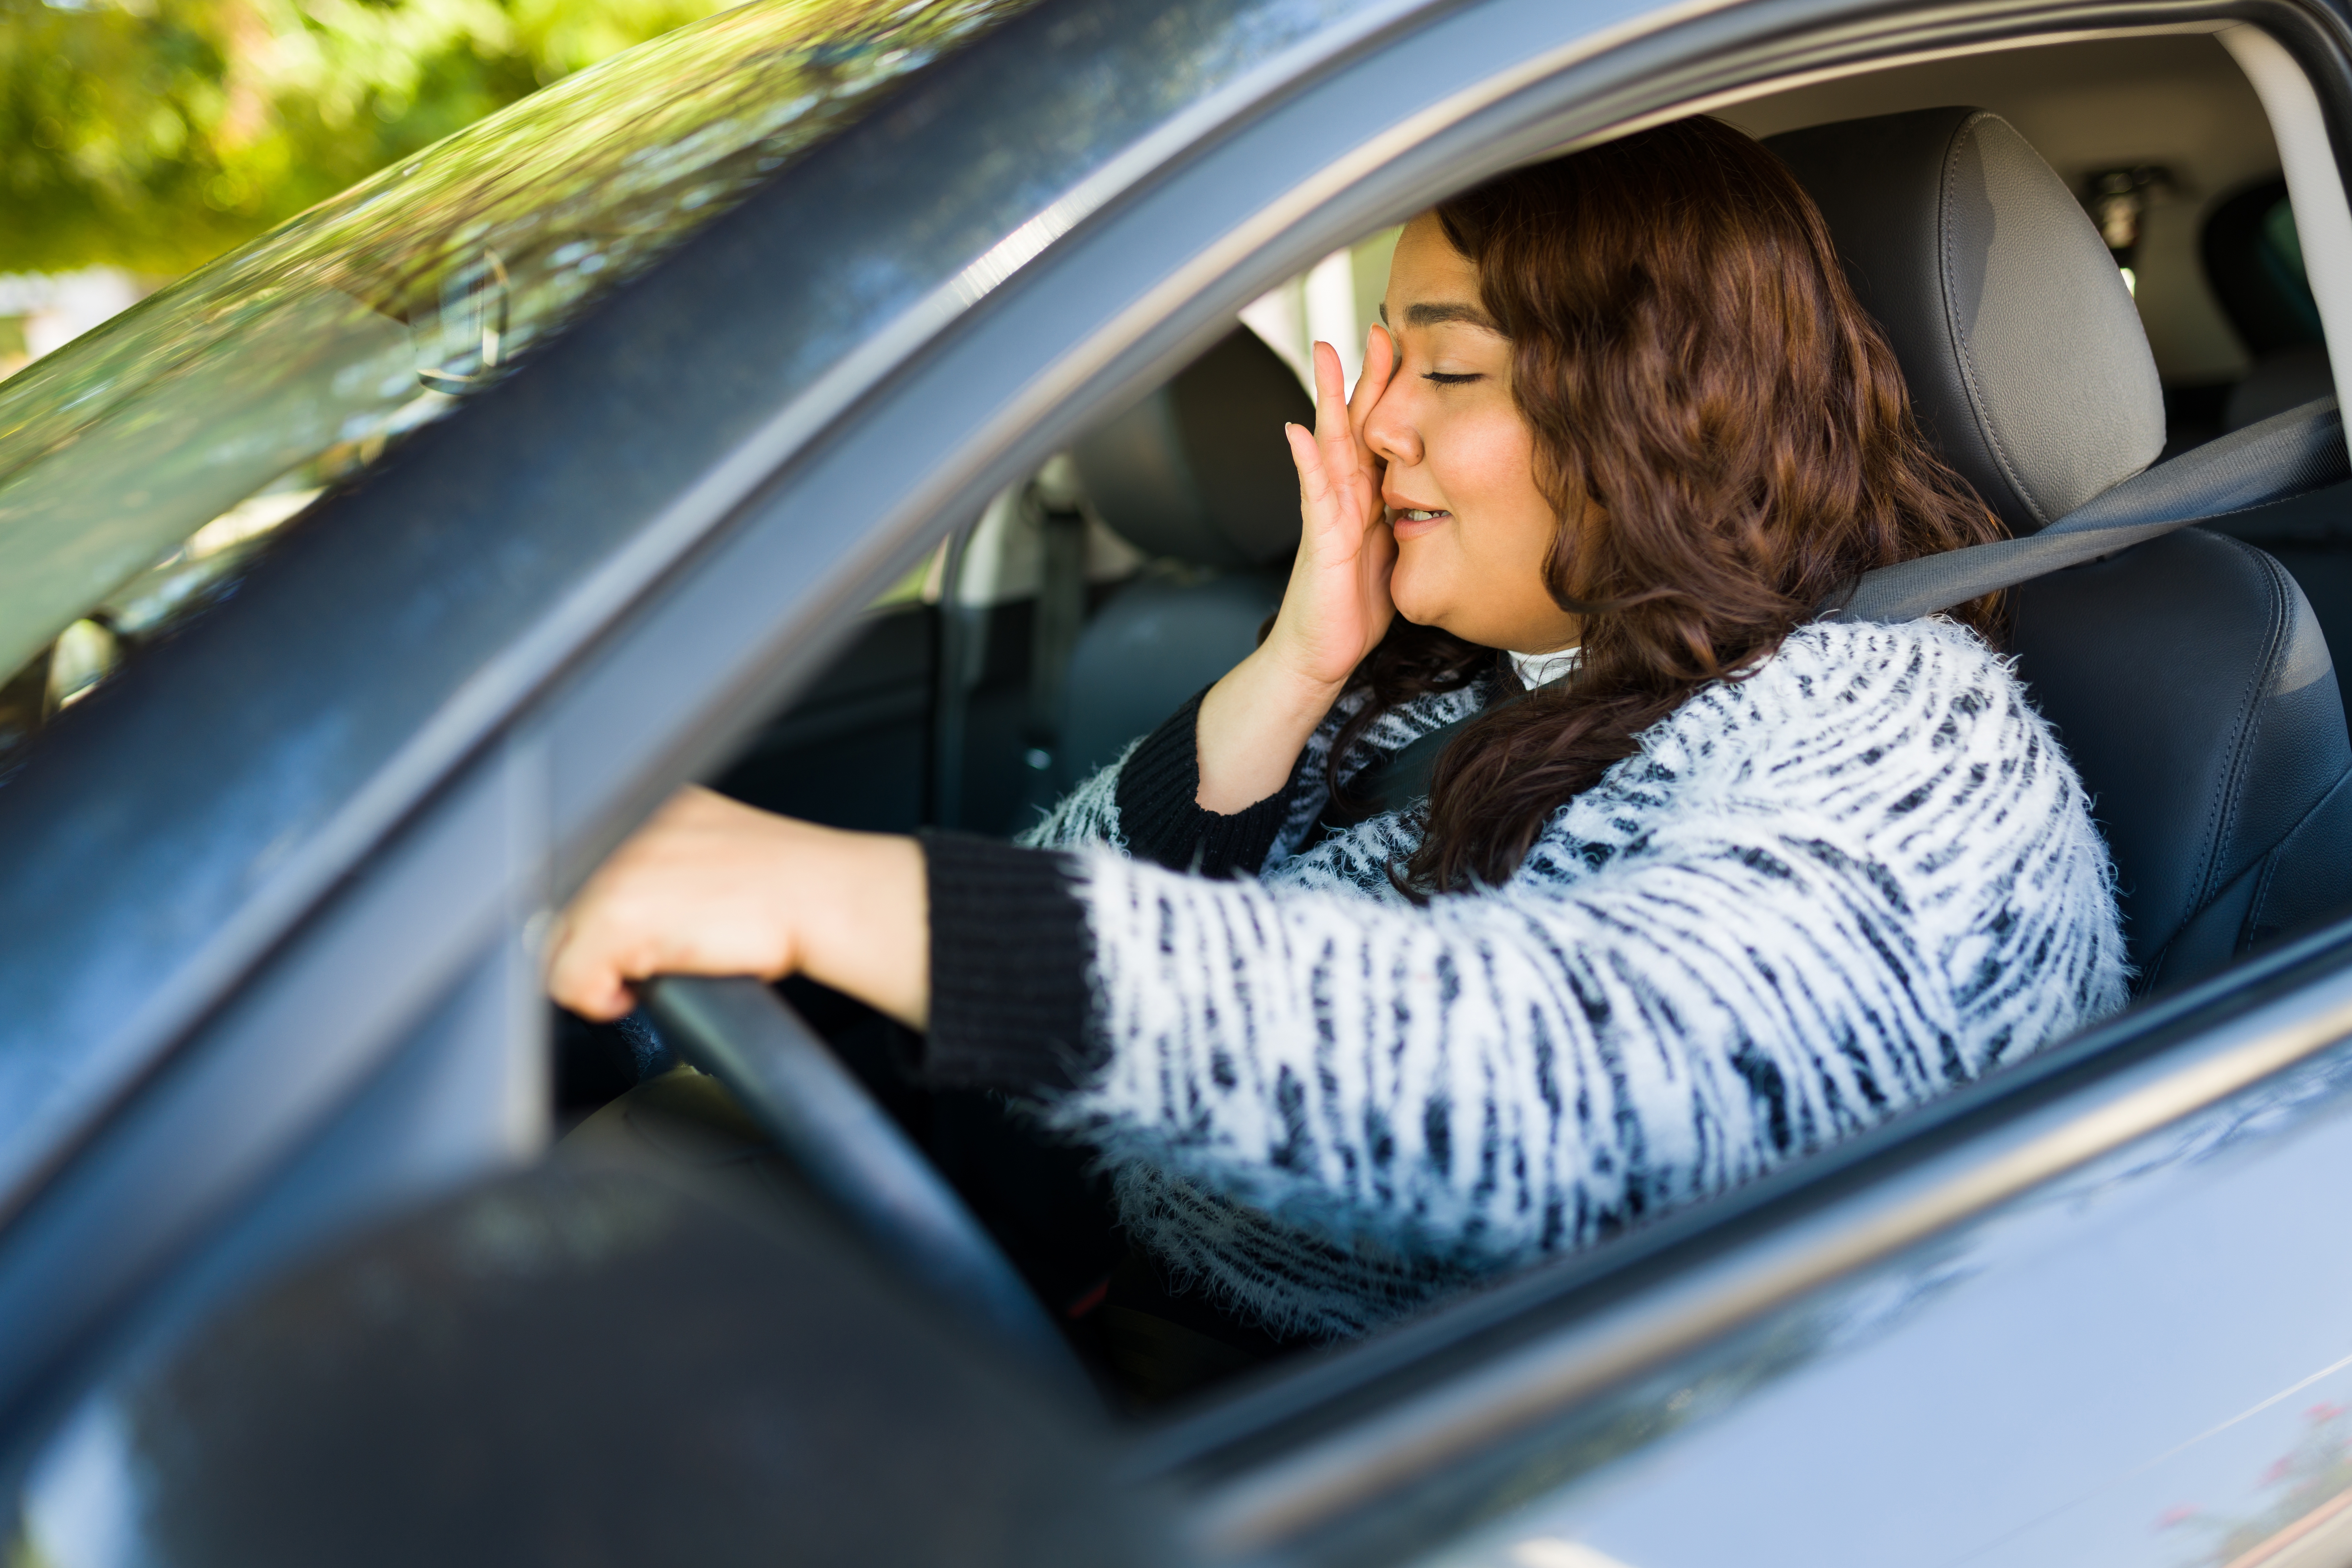 A woman crying while driving a car | Source: Shutterstock